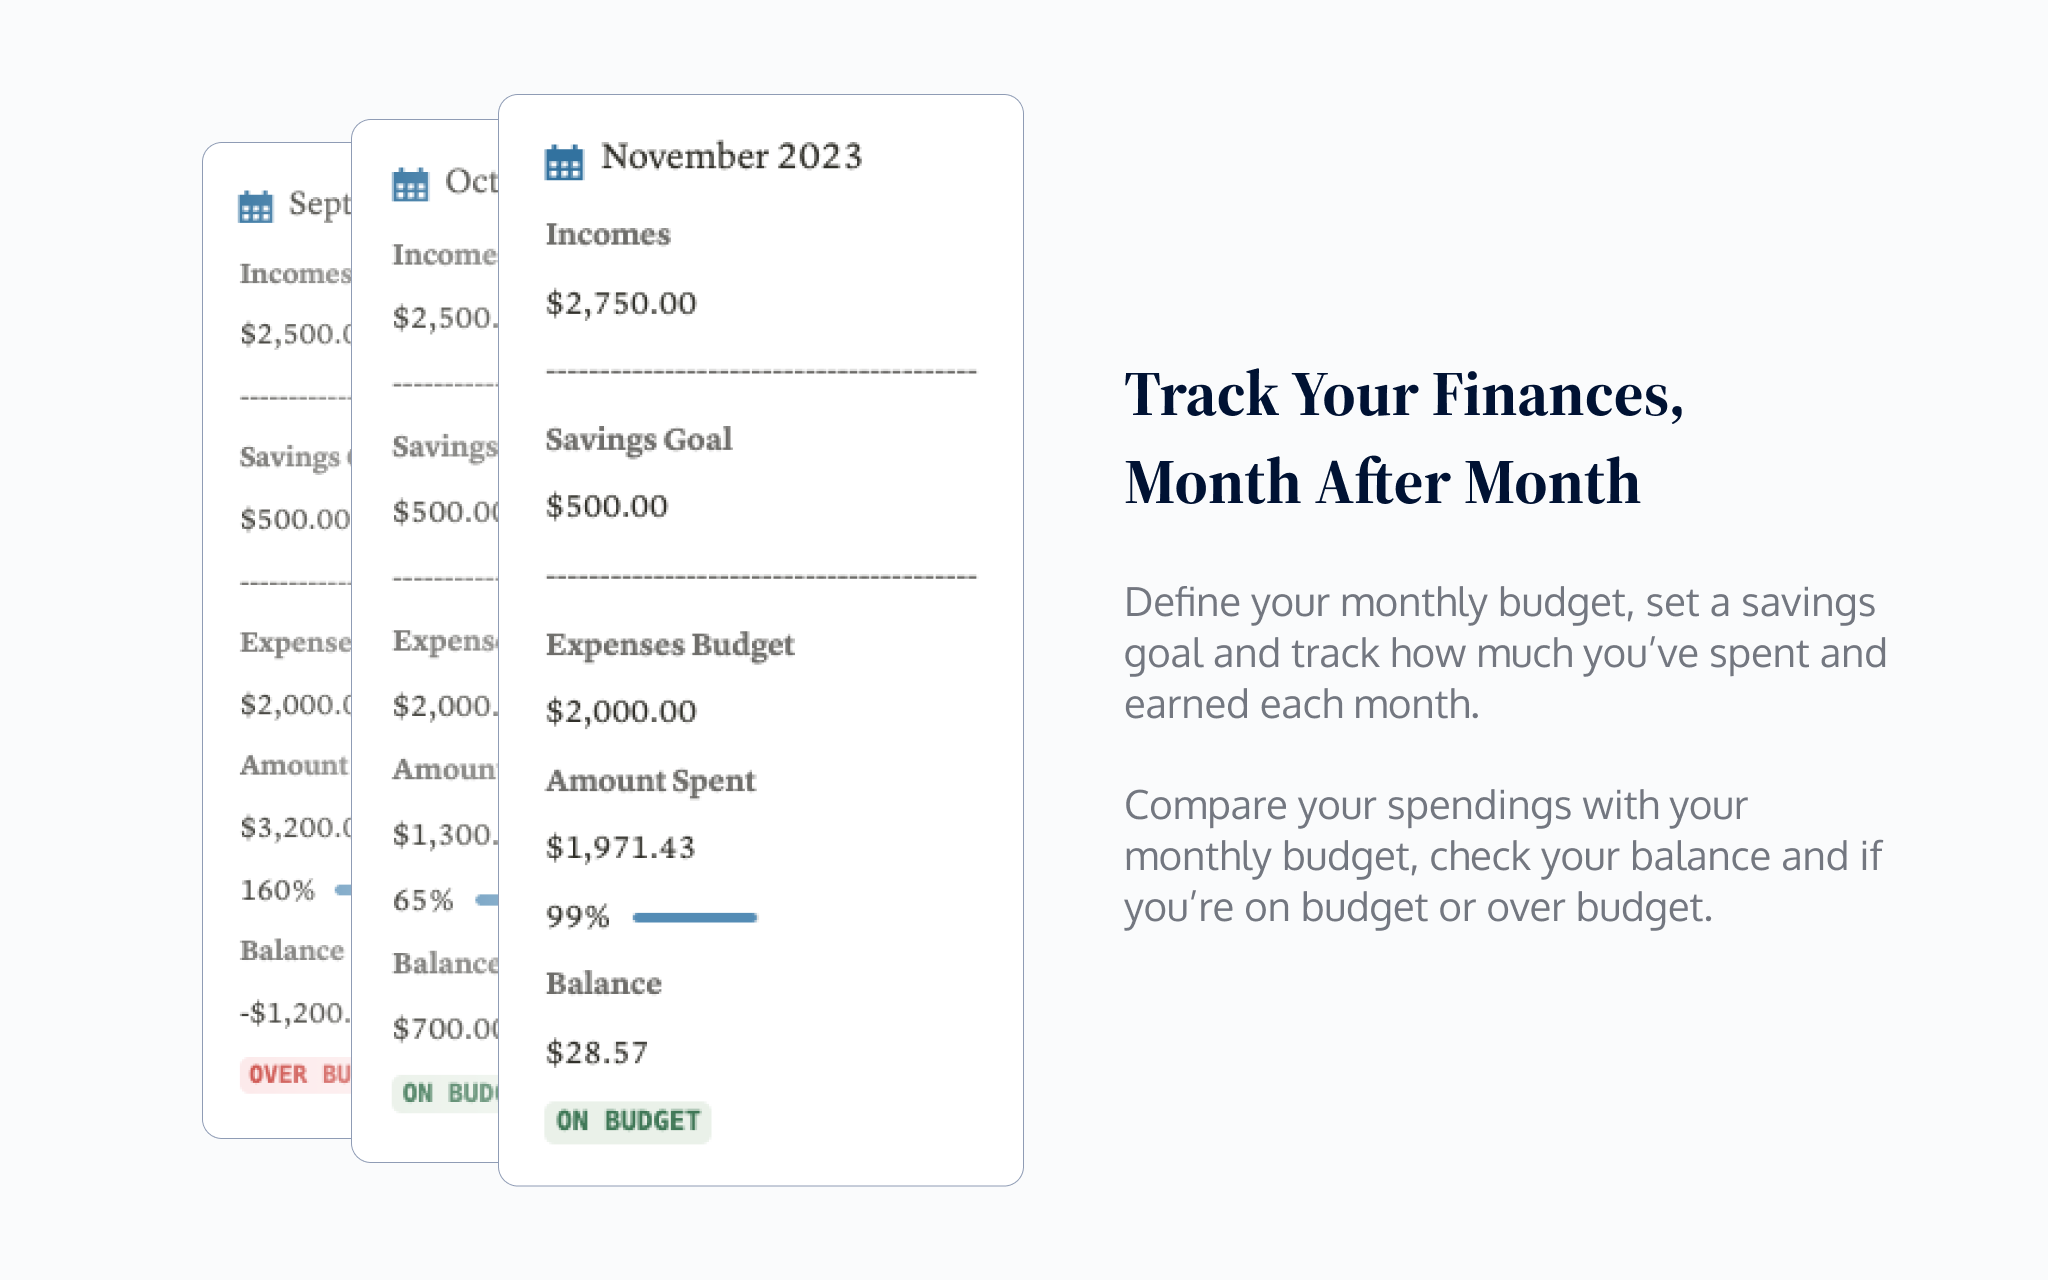 Keep your finances under control with the Annual Budget Planner. Create budgets, track your expenses, keep an eye on your balance and save for what matters.